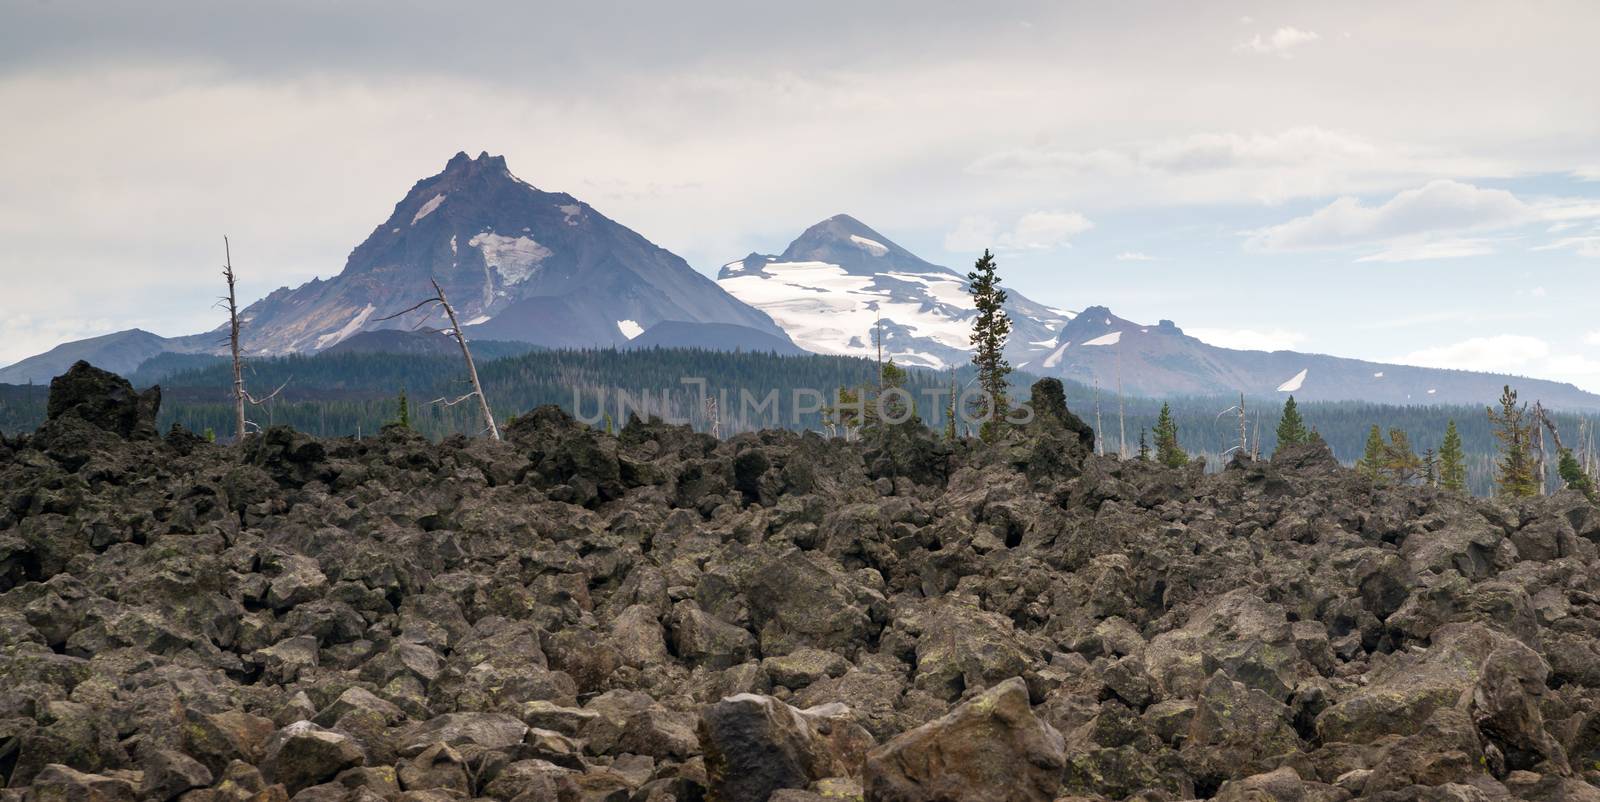 Mckenzie Pass Three Sisters Cascade Range Ancient Lava Field by ChrisBoswell